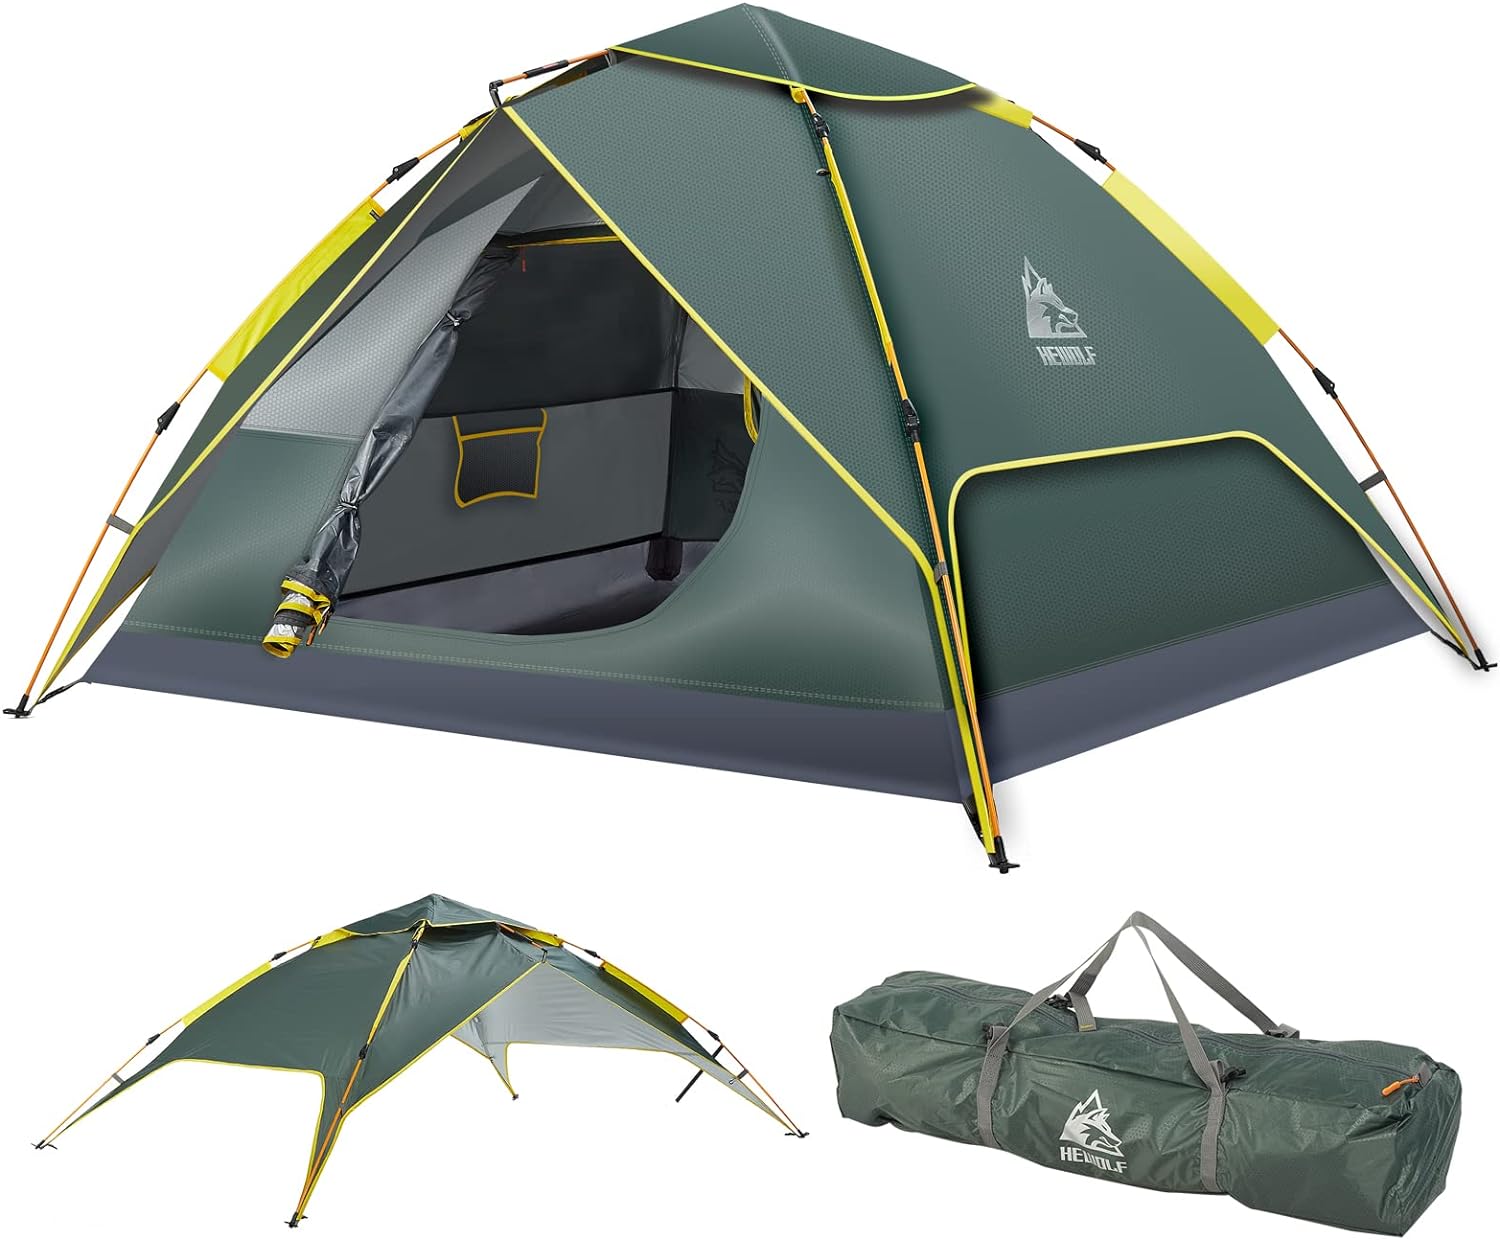 Choosing the Right Camping Tent for Your Outdoor Adventure